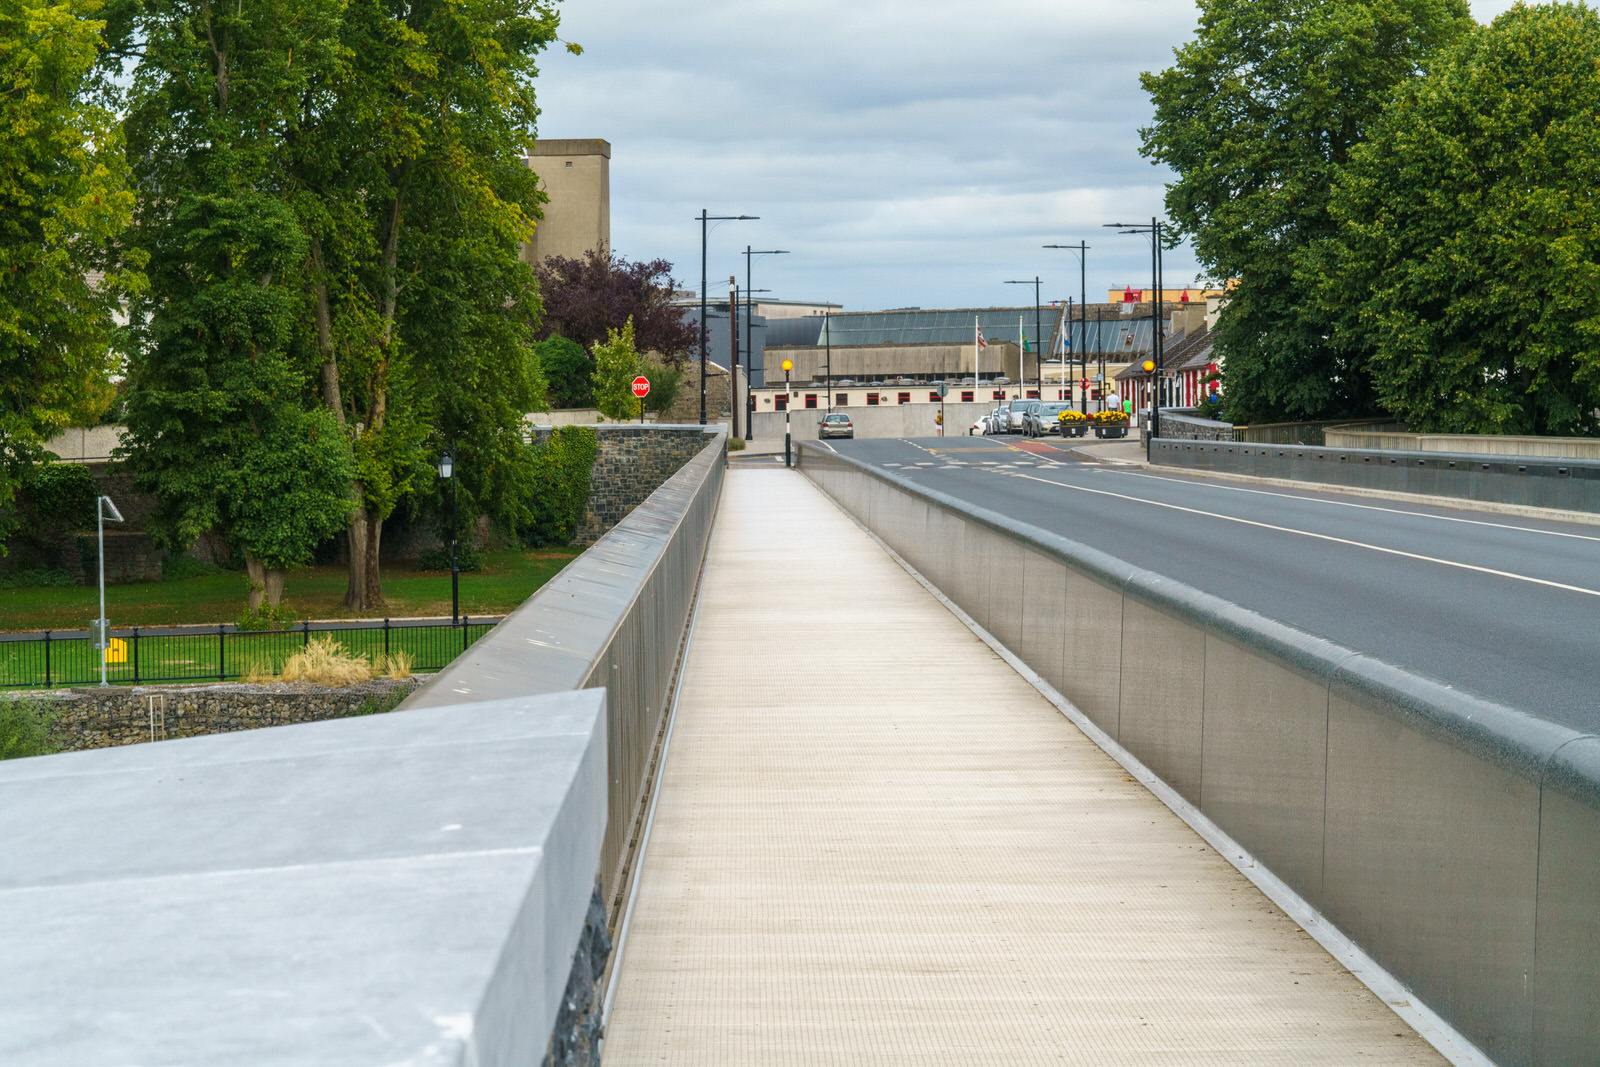 THE NEW ST FRANCIS BRIDGE IN KILKENNY AND THE SURROUNDING AREA [OPENED TO THE PUBLIC IN 2017]-227041-1